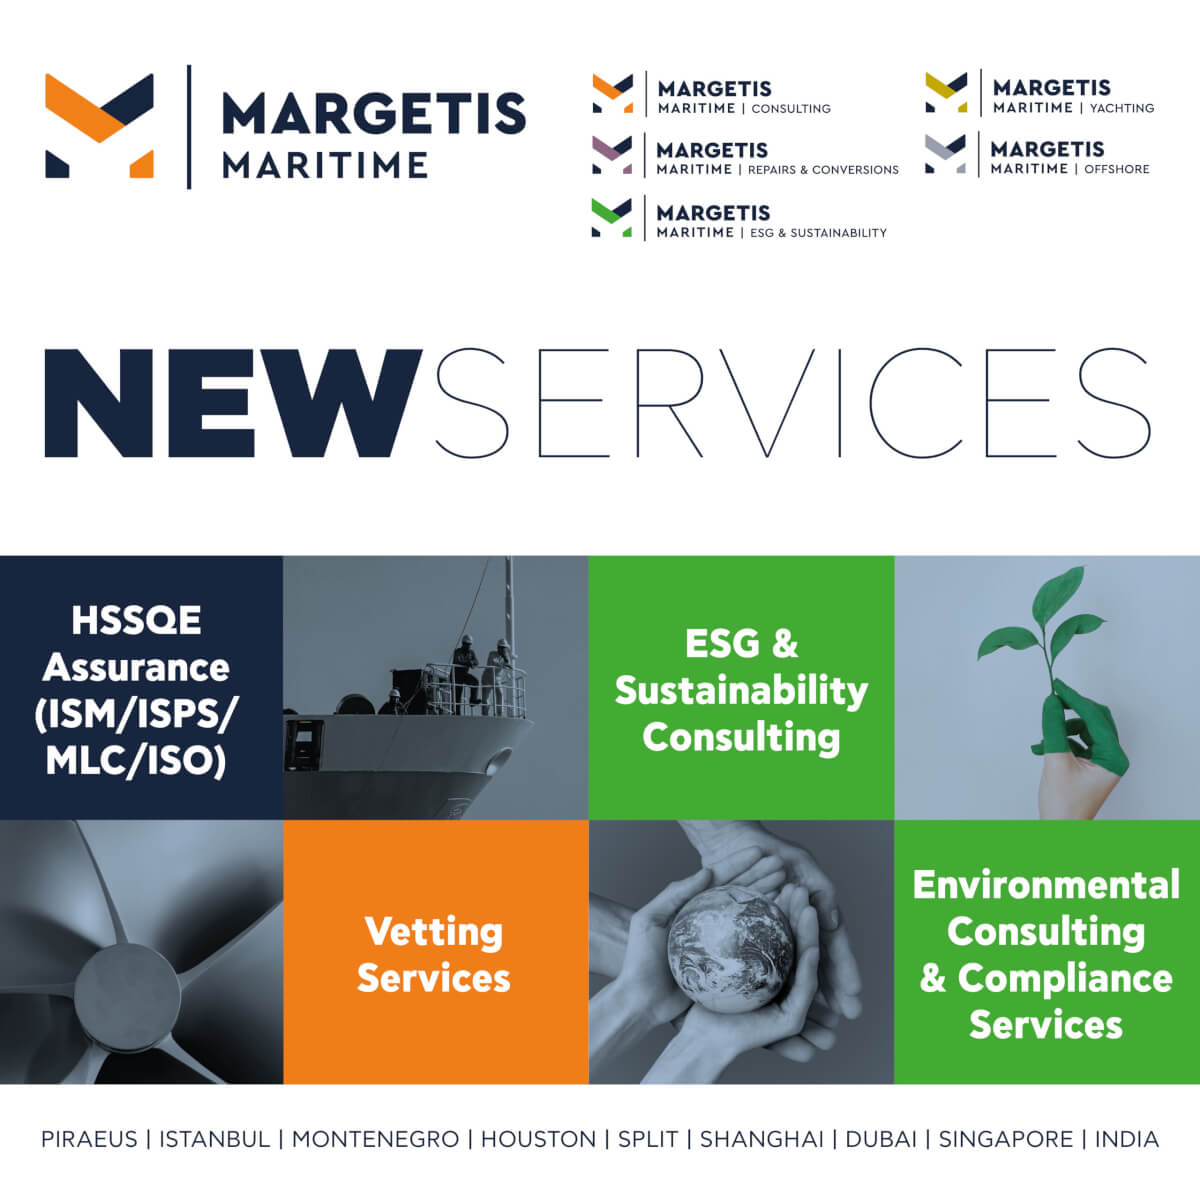 Four (4) new services: Vetting, HSSQE Assurance, Environmental, and ESG & Sustainability solutions.